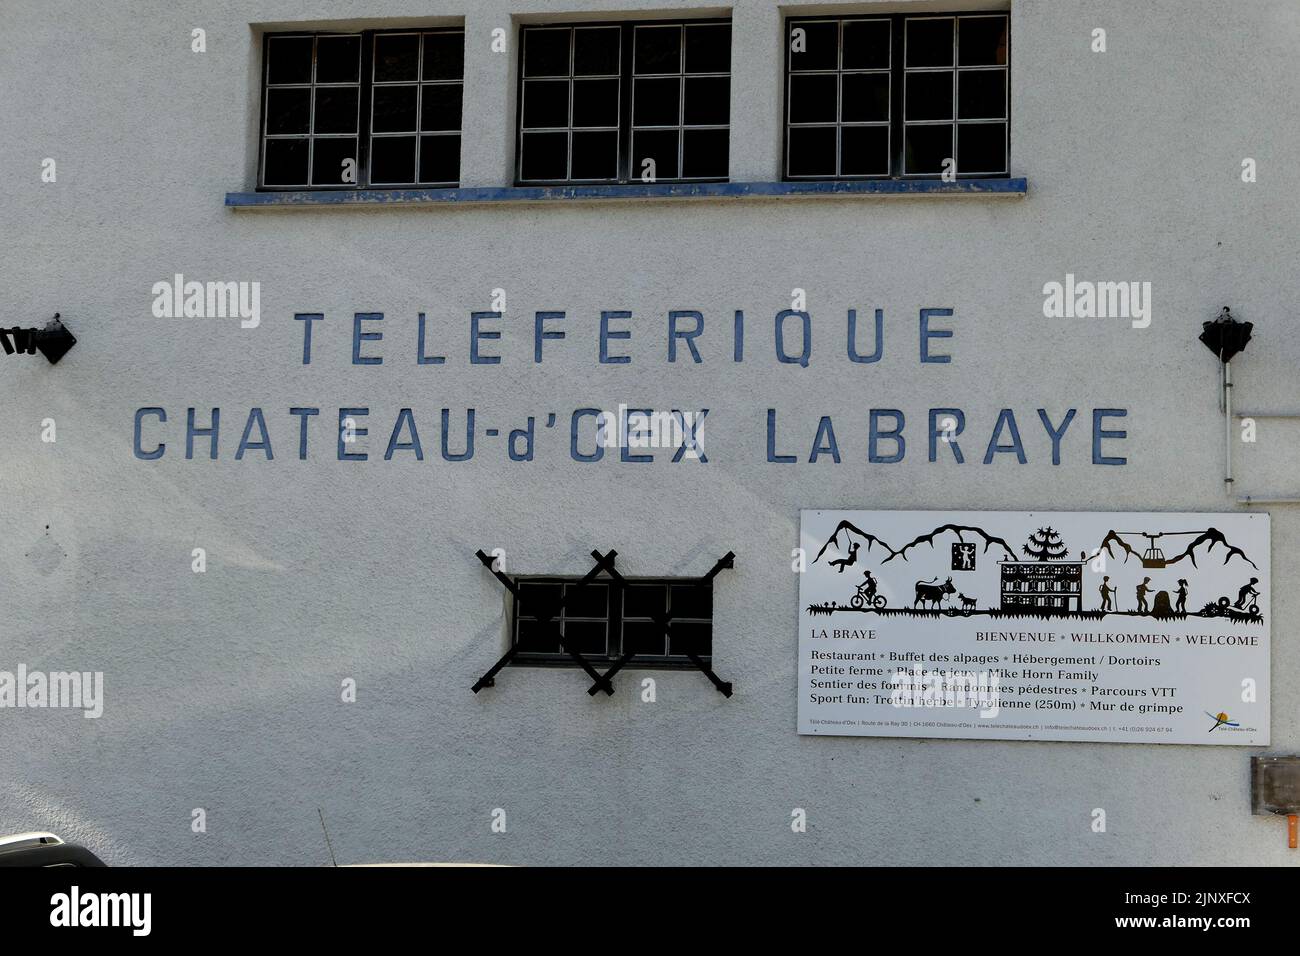  The image shows a building with a sign that says 'Chateau d'Oex La Braye' in French and 'Telepherique' above it. It also has a sign that says 'La Braye' with a skier on it.